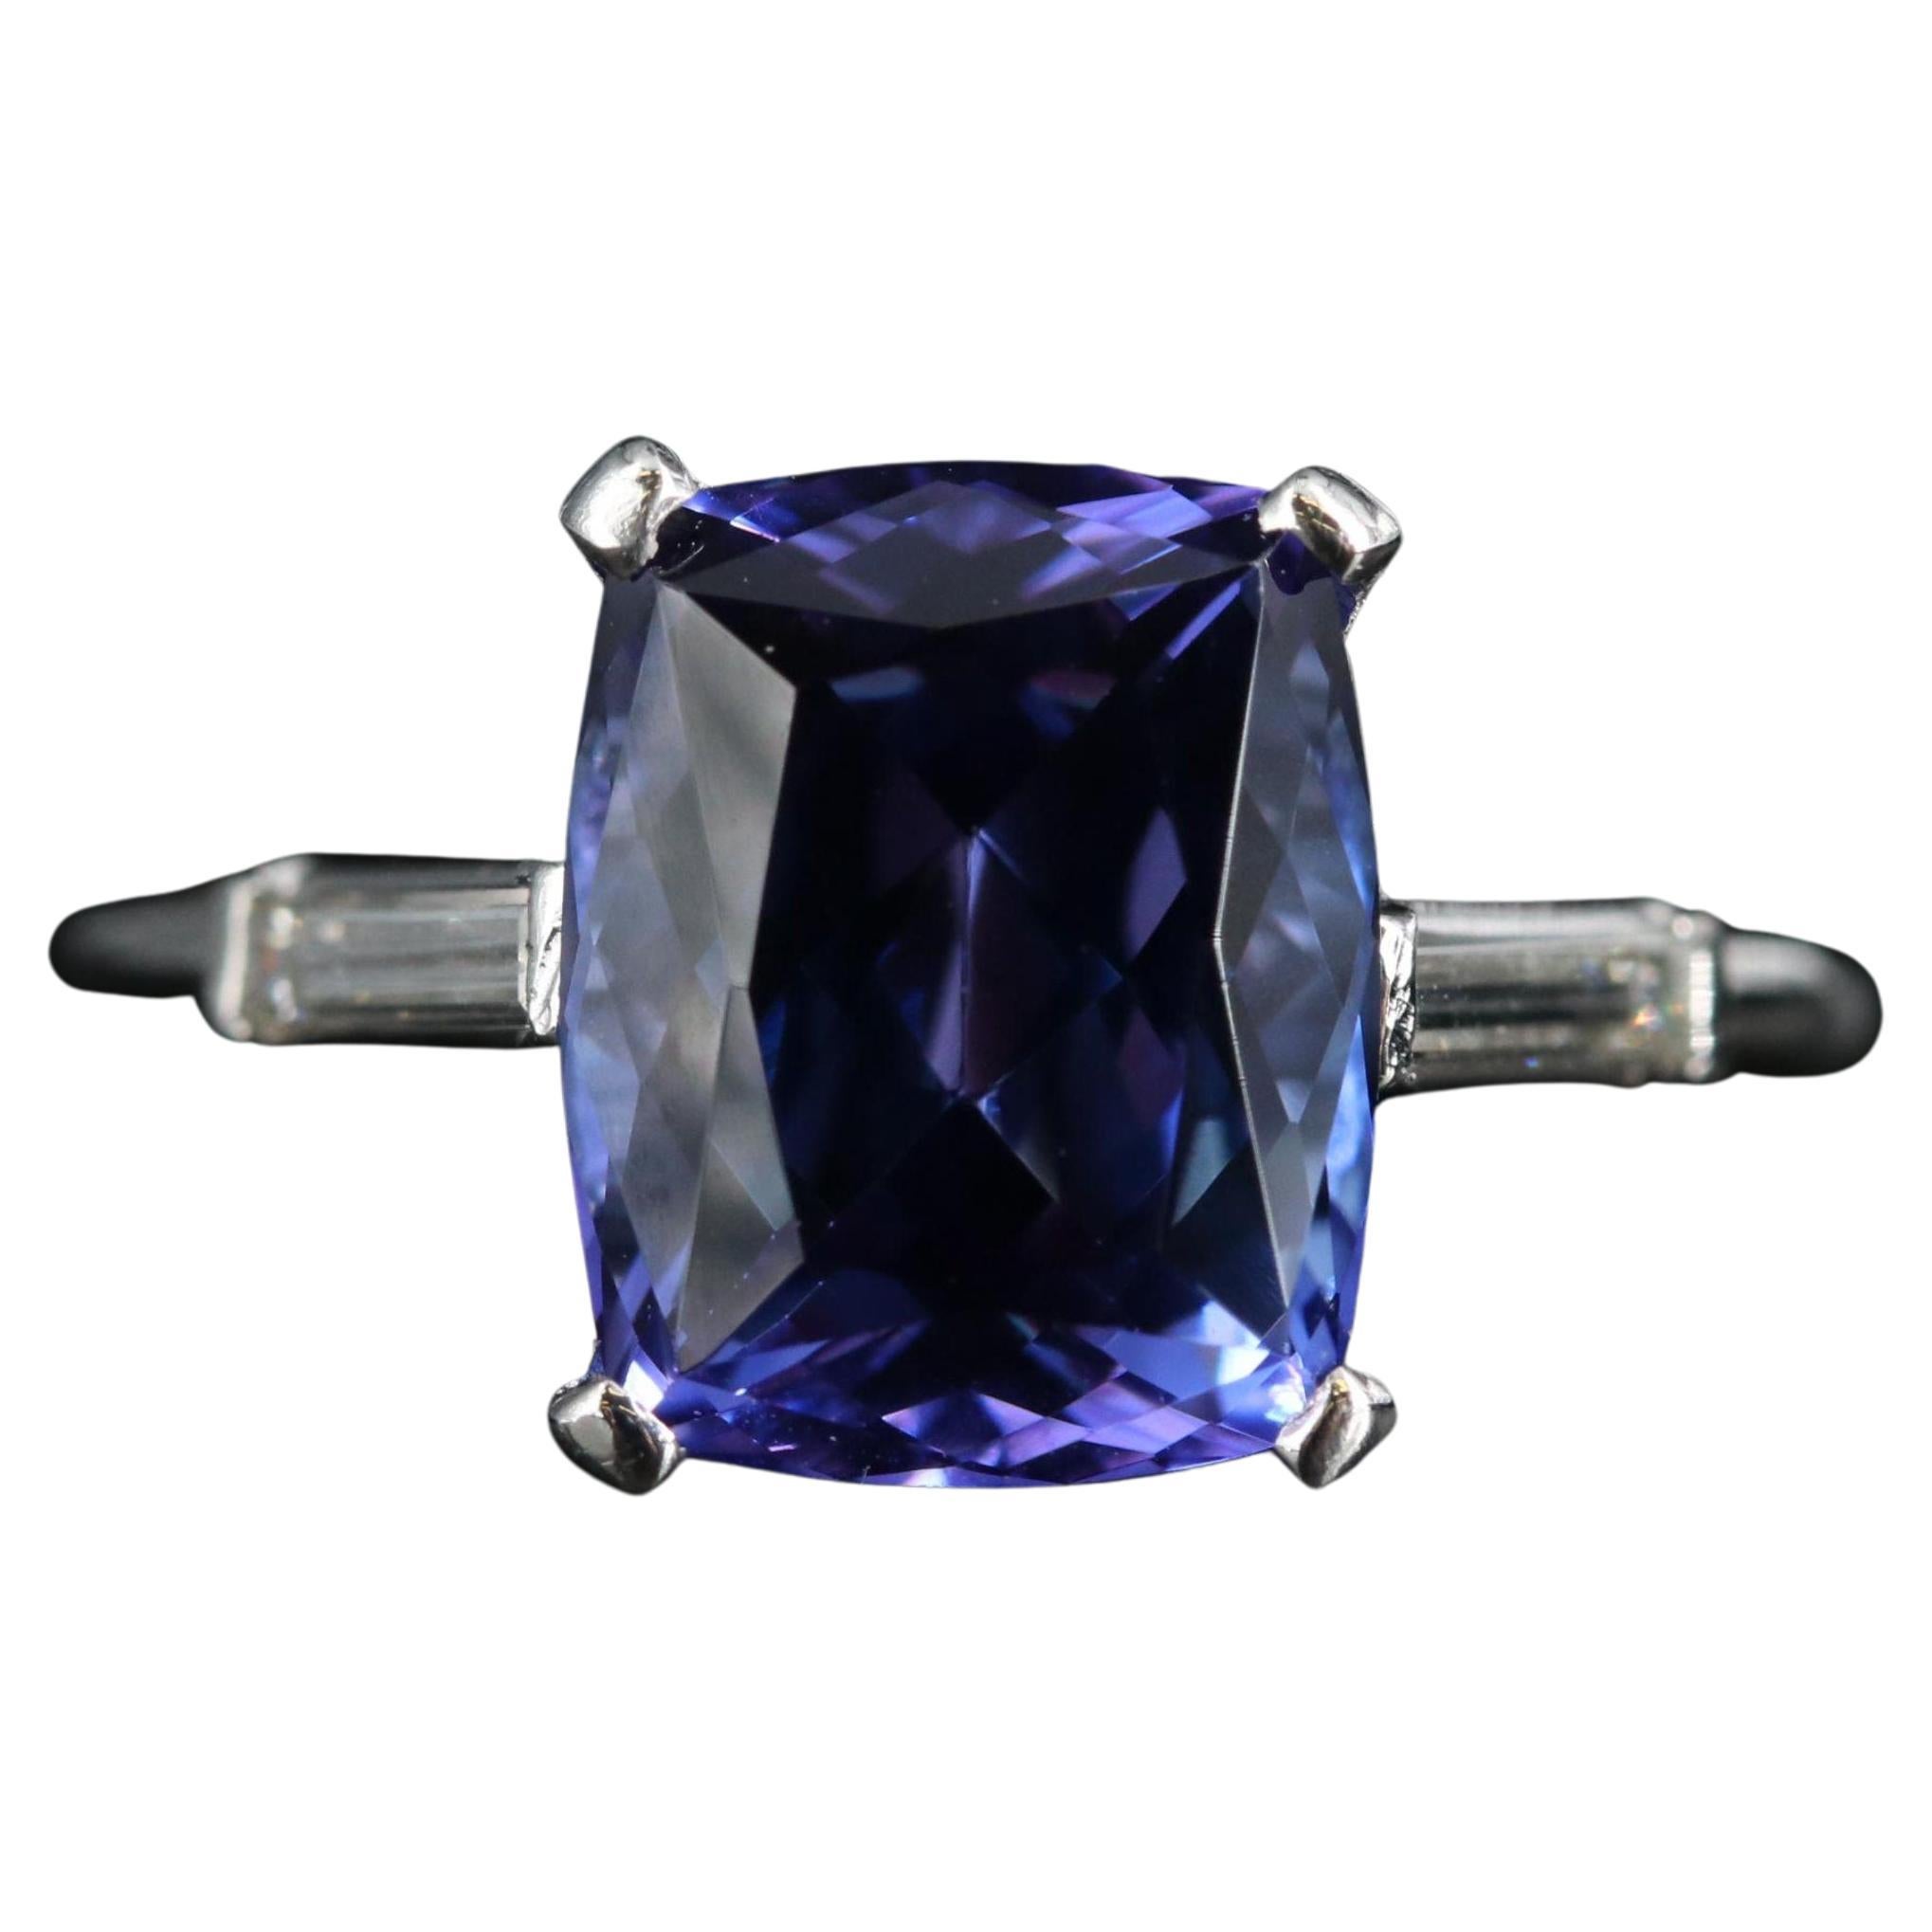 For Sale:  Antique 3.56 Carat Natural Tanzanite Diamond Engagement Ring in 18K Gold